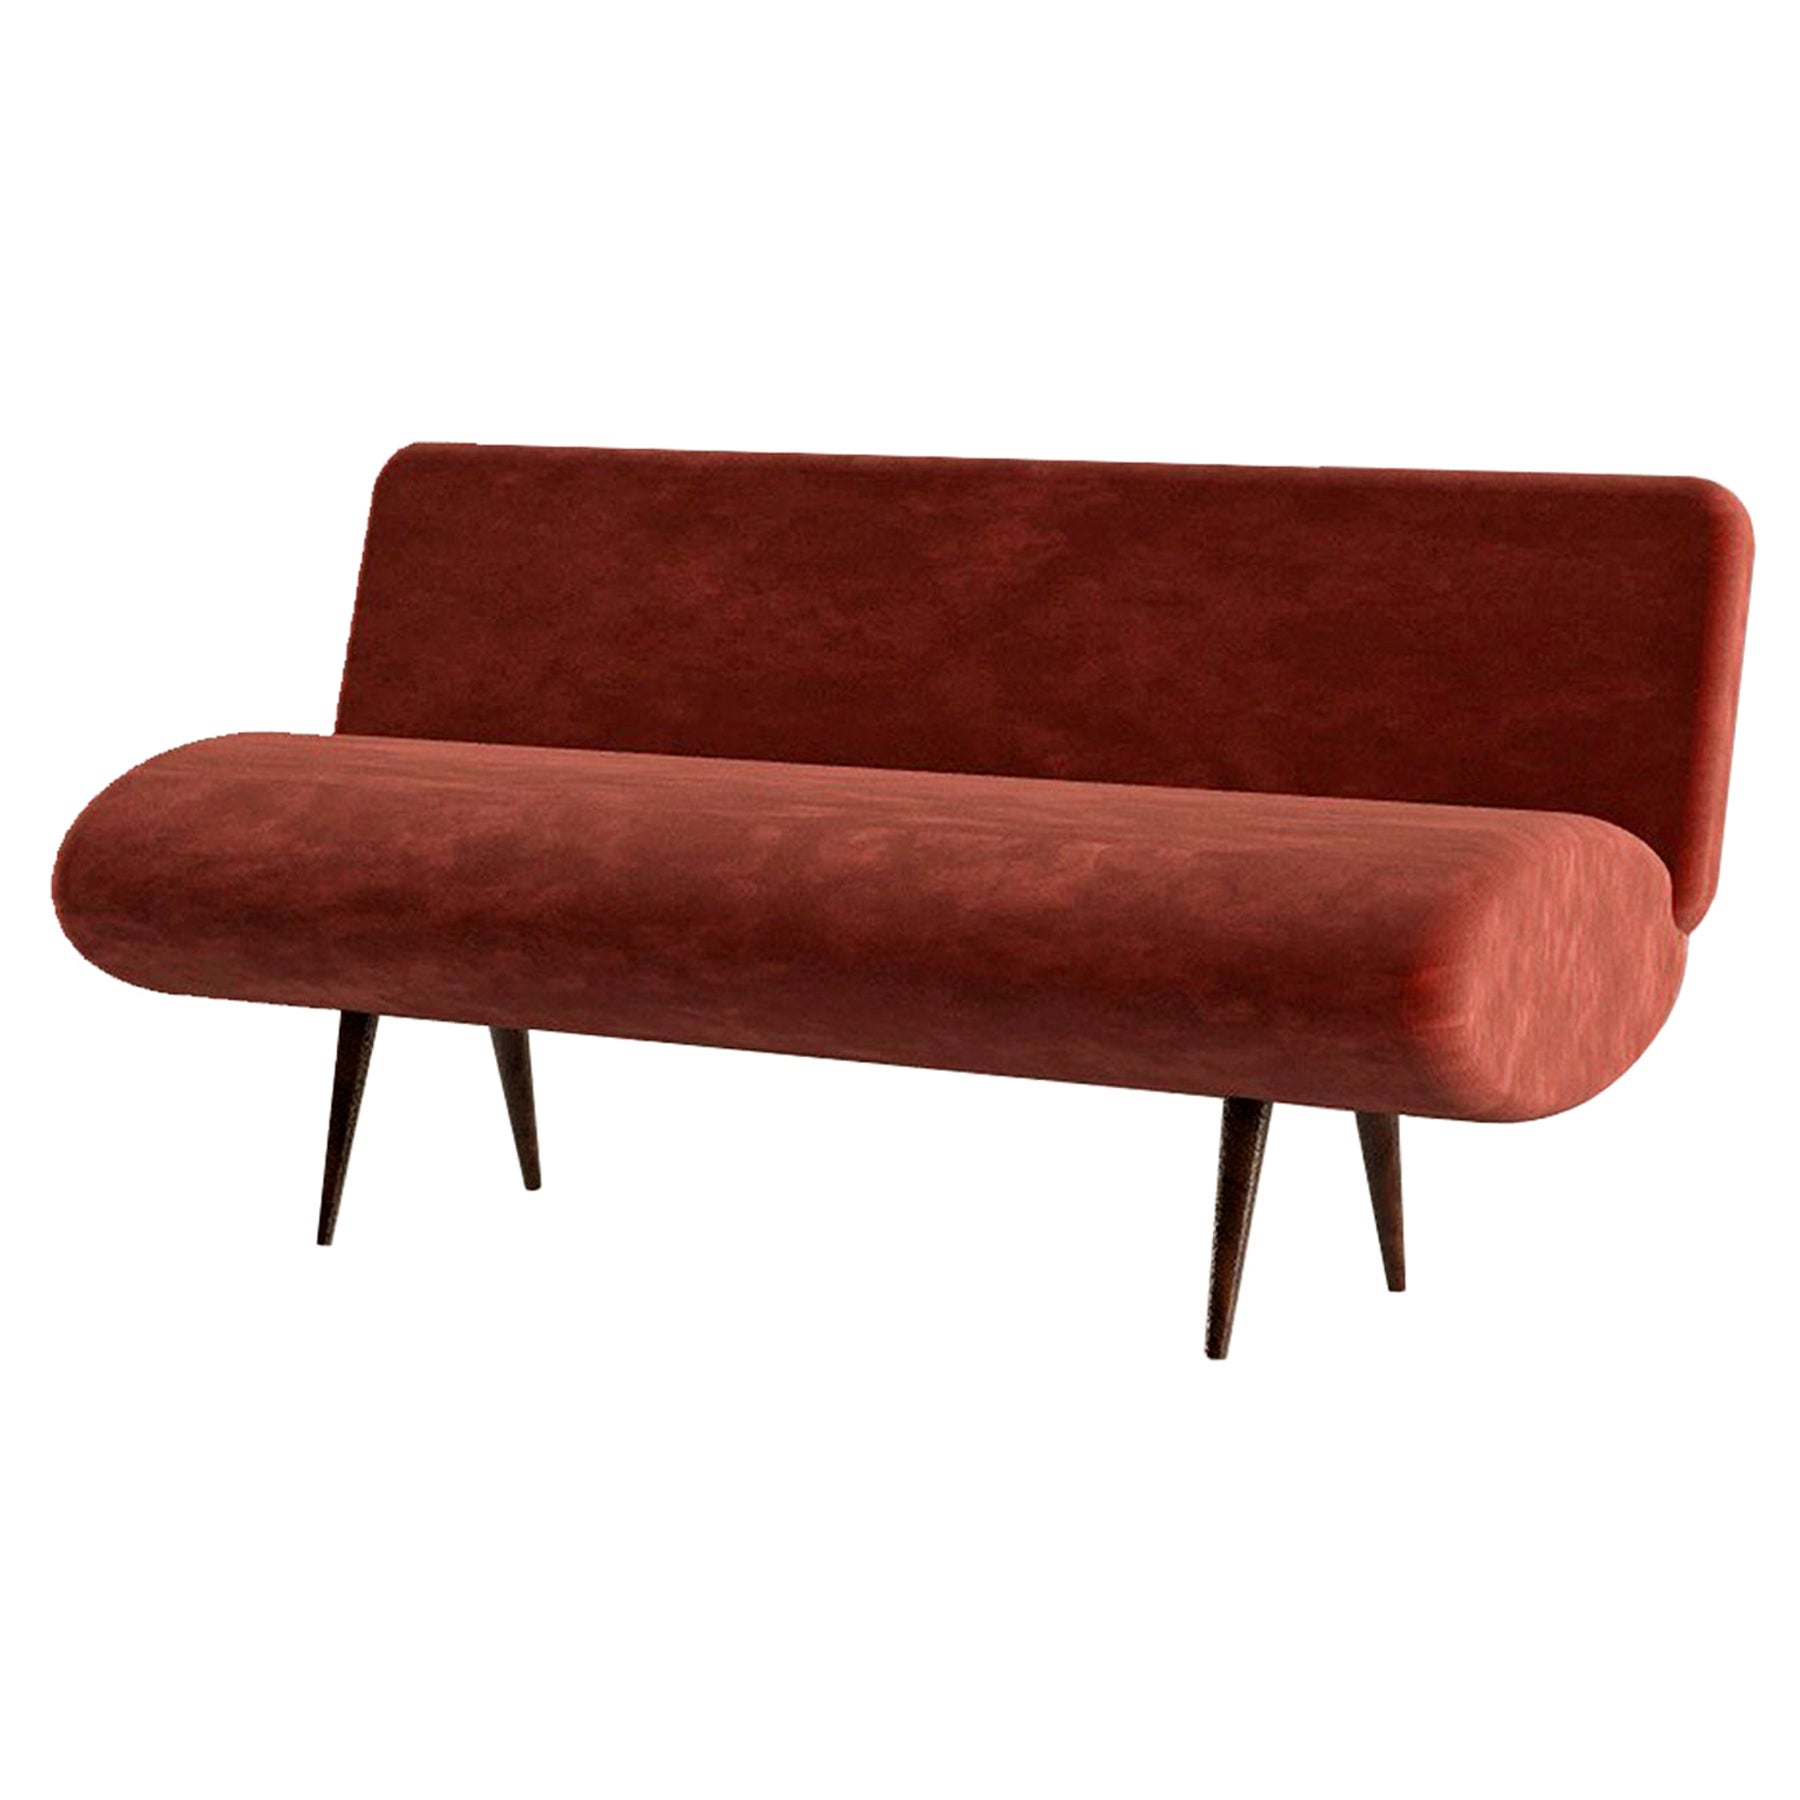 Cylinder Mohair Sofa by Rejo Studio